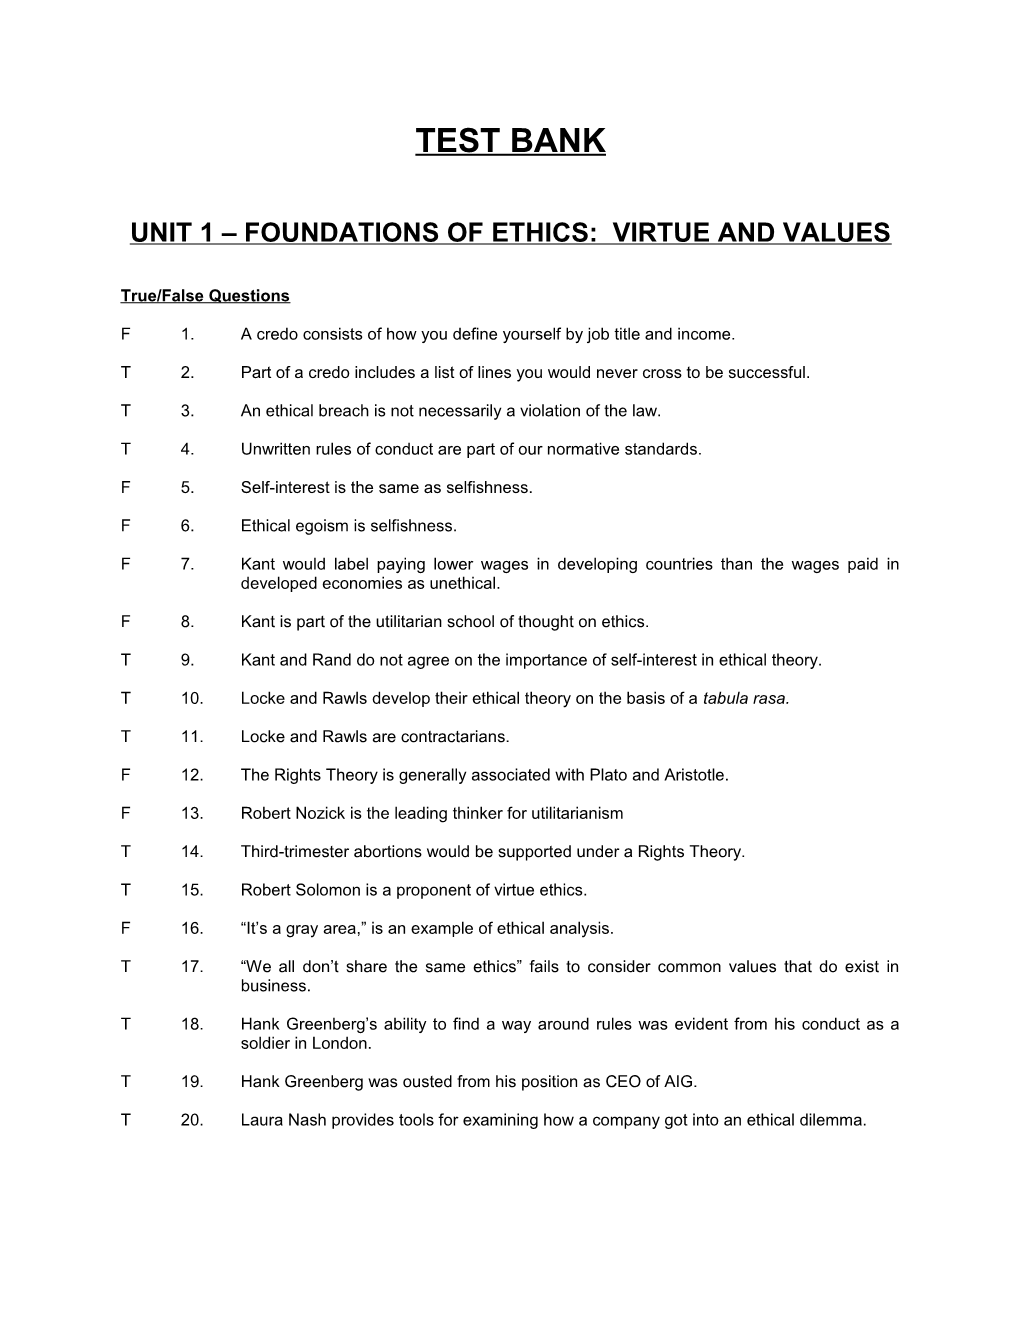 Unit 1 Foundations of Ethics: Virtue and Values